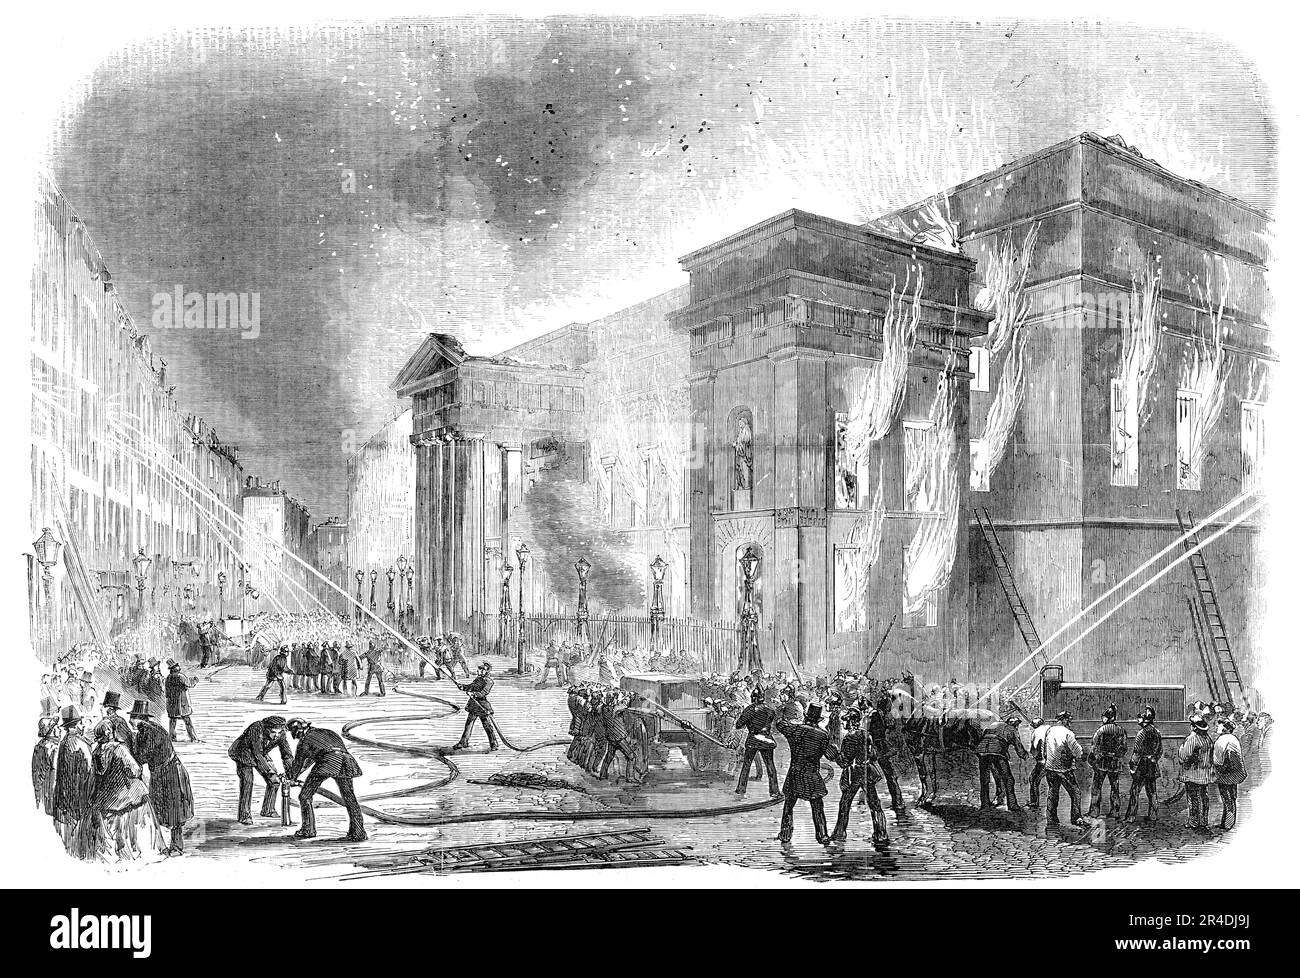 Burning of Covent-Garden Theatre, [London], 1856. Inquiry into the cause of the fire: 'John Drake Palmer, gasman, said he had the entire management of the gas-fittings of the theatre, and had fitted up the carpenter's shop with gas just previously to Christmas last. The whole arrangements for lighting the theatre were under the control of himself or his assistants. It was impossible, he thought, for the fire to have originated by reason of any escape of gas in the carpenter's shop. Mr. Henry Sloman, machinist and carpenter to the theatre during the last thirty years, was next examined. He said Stock Photo